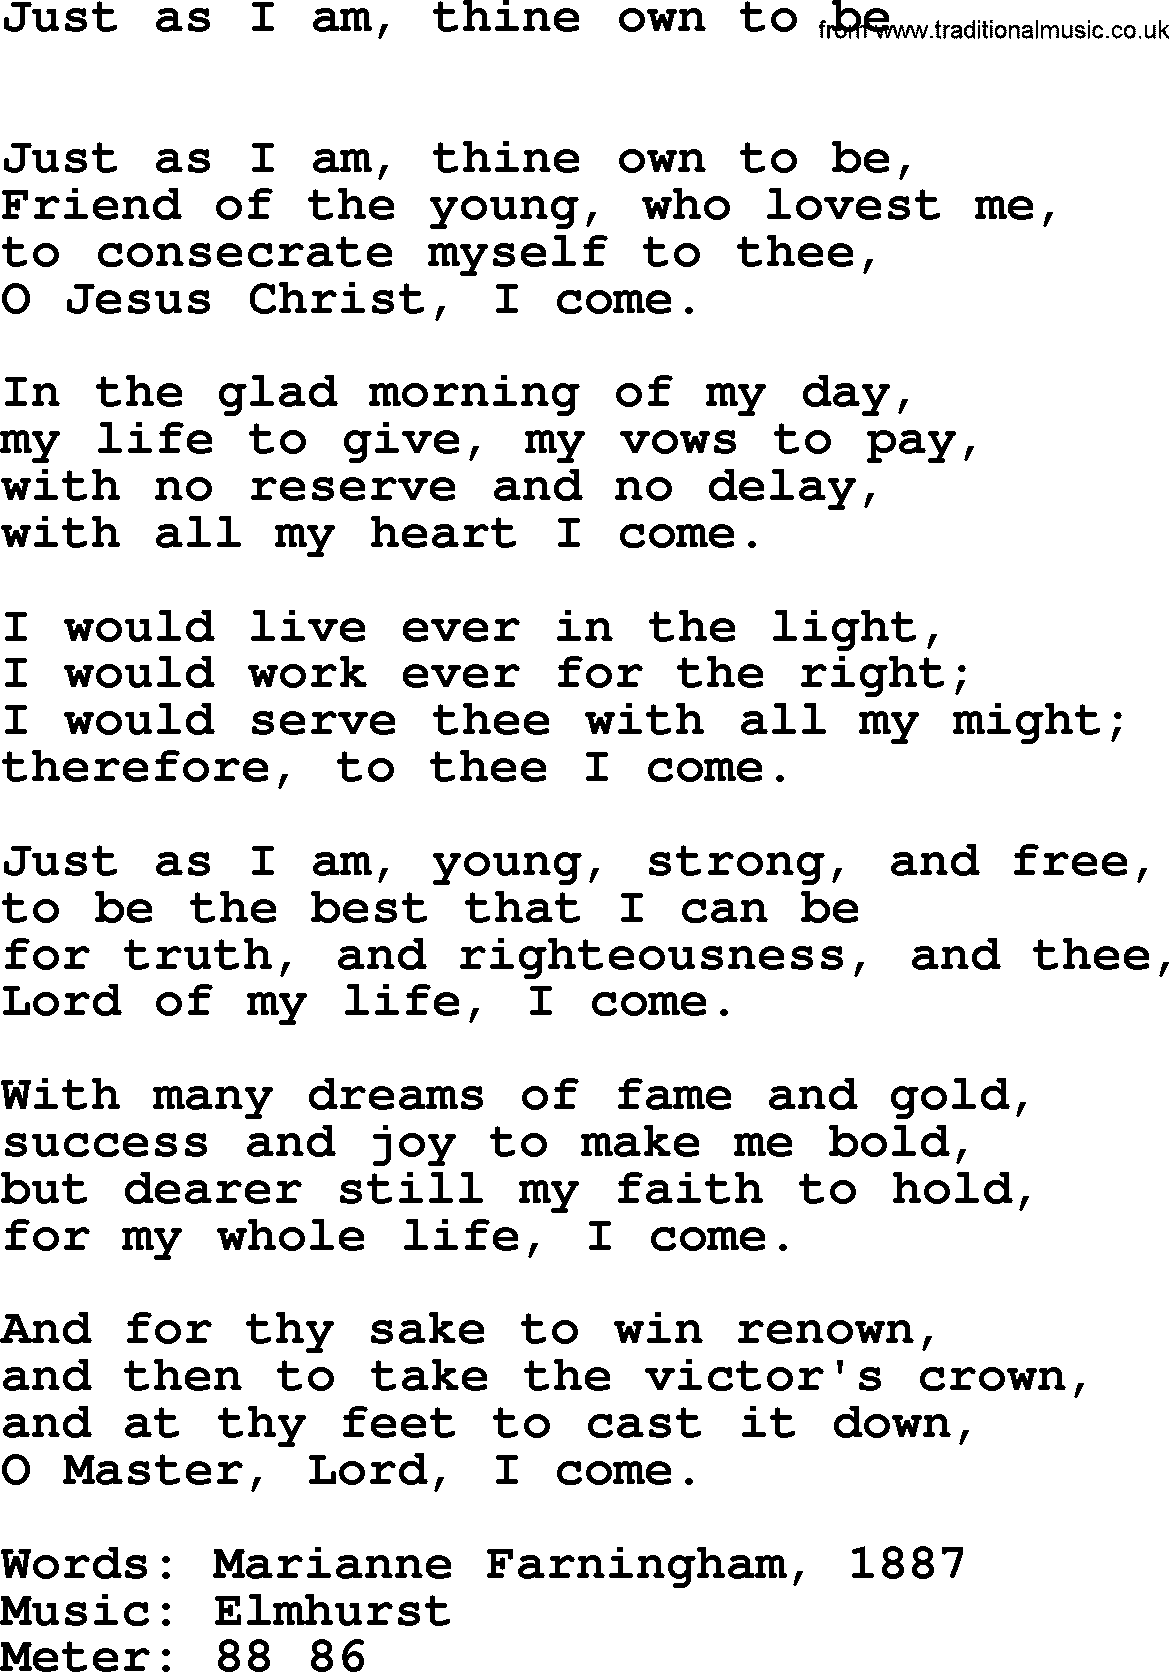 Book of Common Praise Hymn: Just As I Am, Thine Own To Be.txt lyrics with midi music